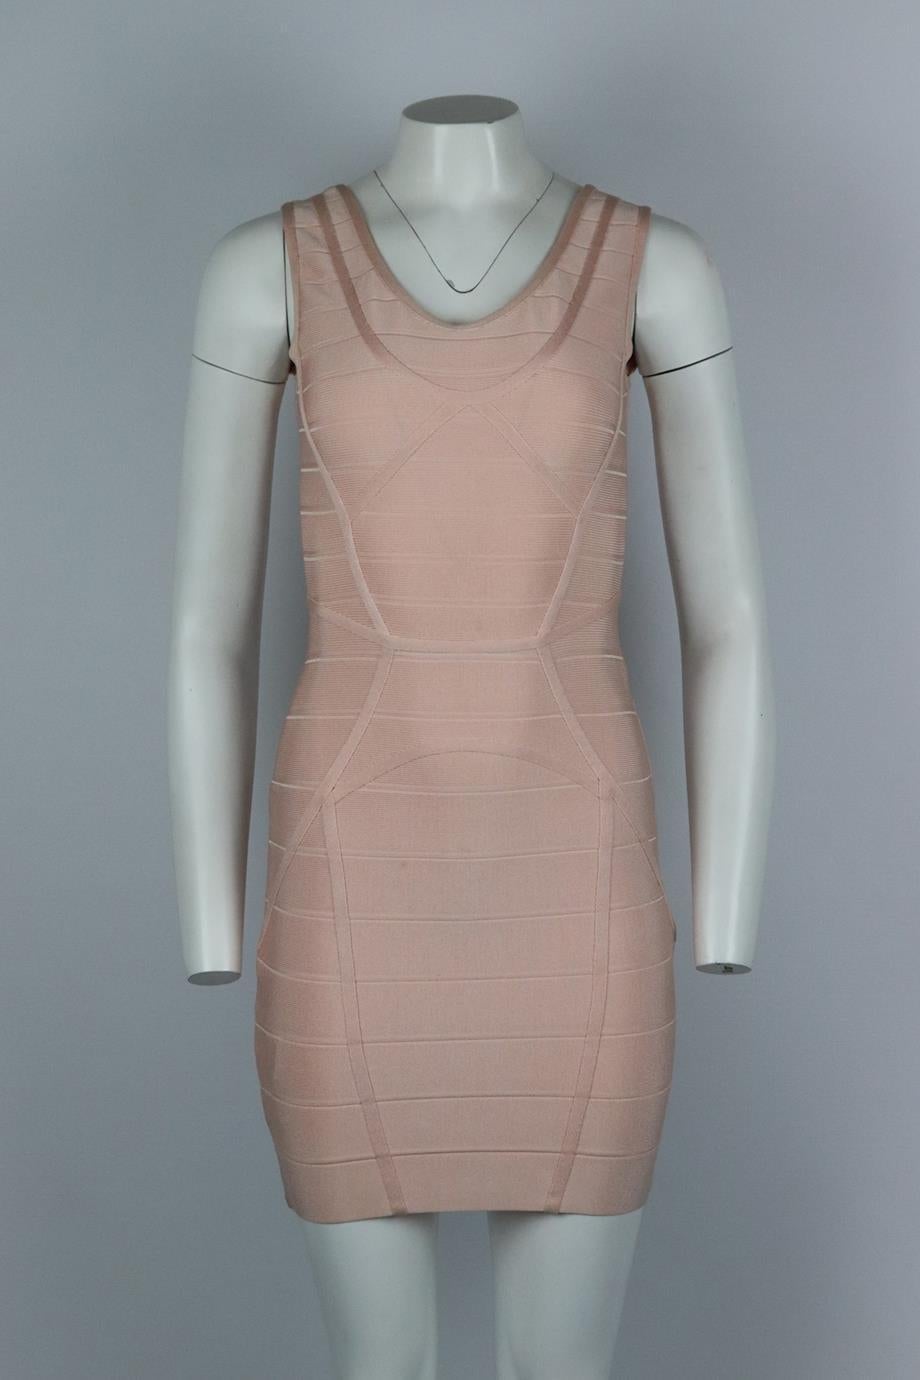 Herve Leger bandage mini dress. Pink. Sleeveless, scoop neck. Zip fastening at back. 90% Rayon, 9% nylon, 1% spandex. Size: Small (UK 8, US 4, FR 36, IT 40). Bust: 31.5 in. Waist: 23.5 in. Hips: 30.4 in. Length: 33 in. Fair condition - Some marks